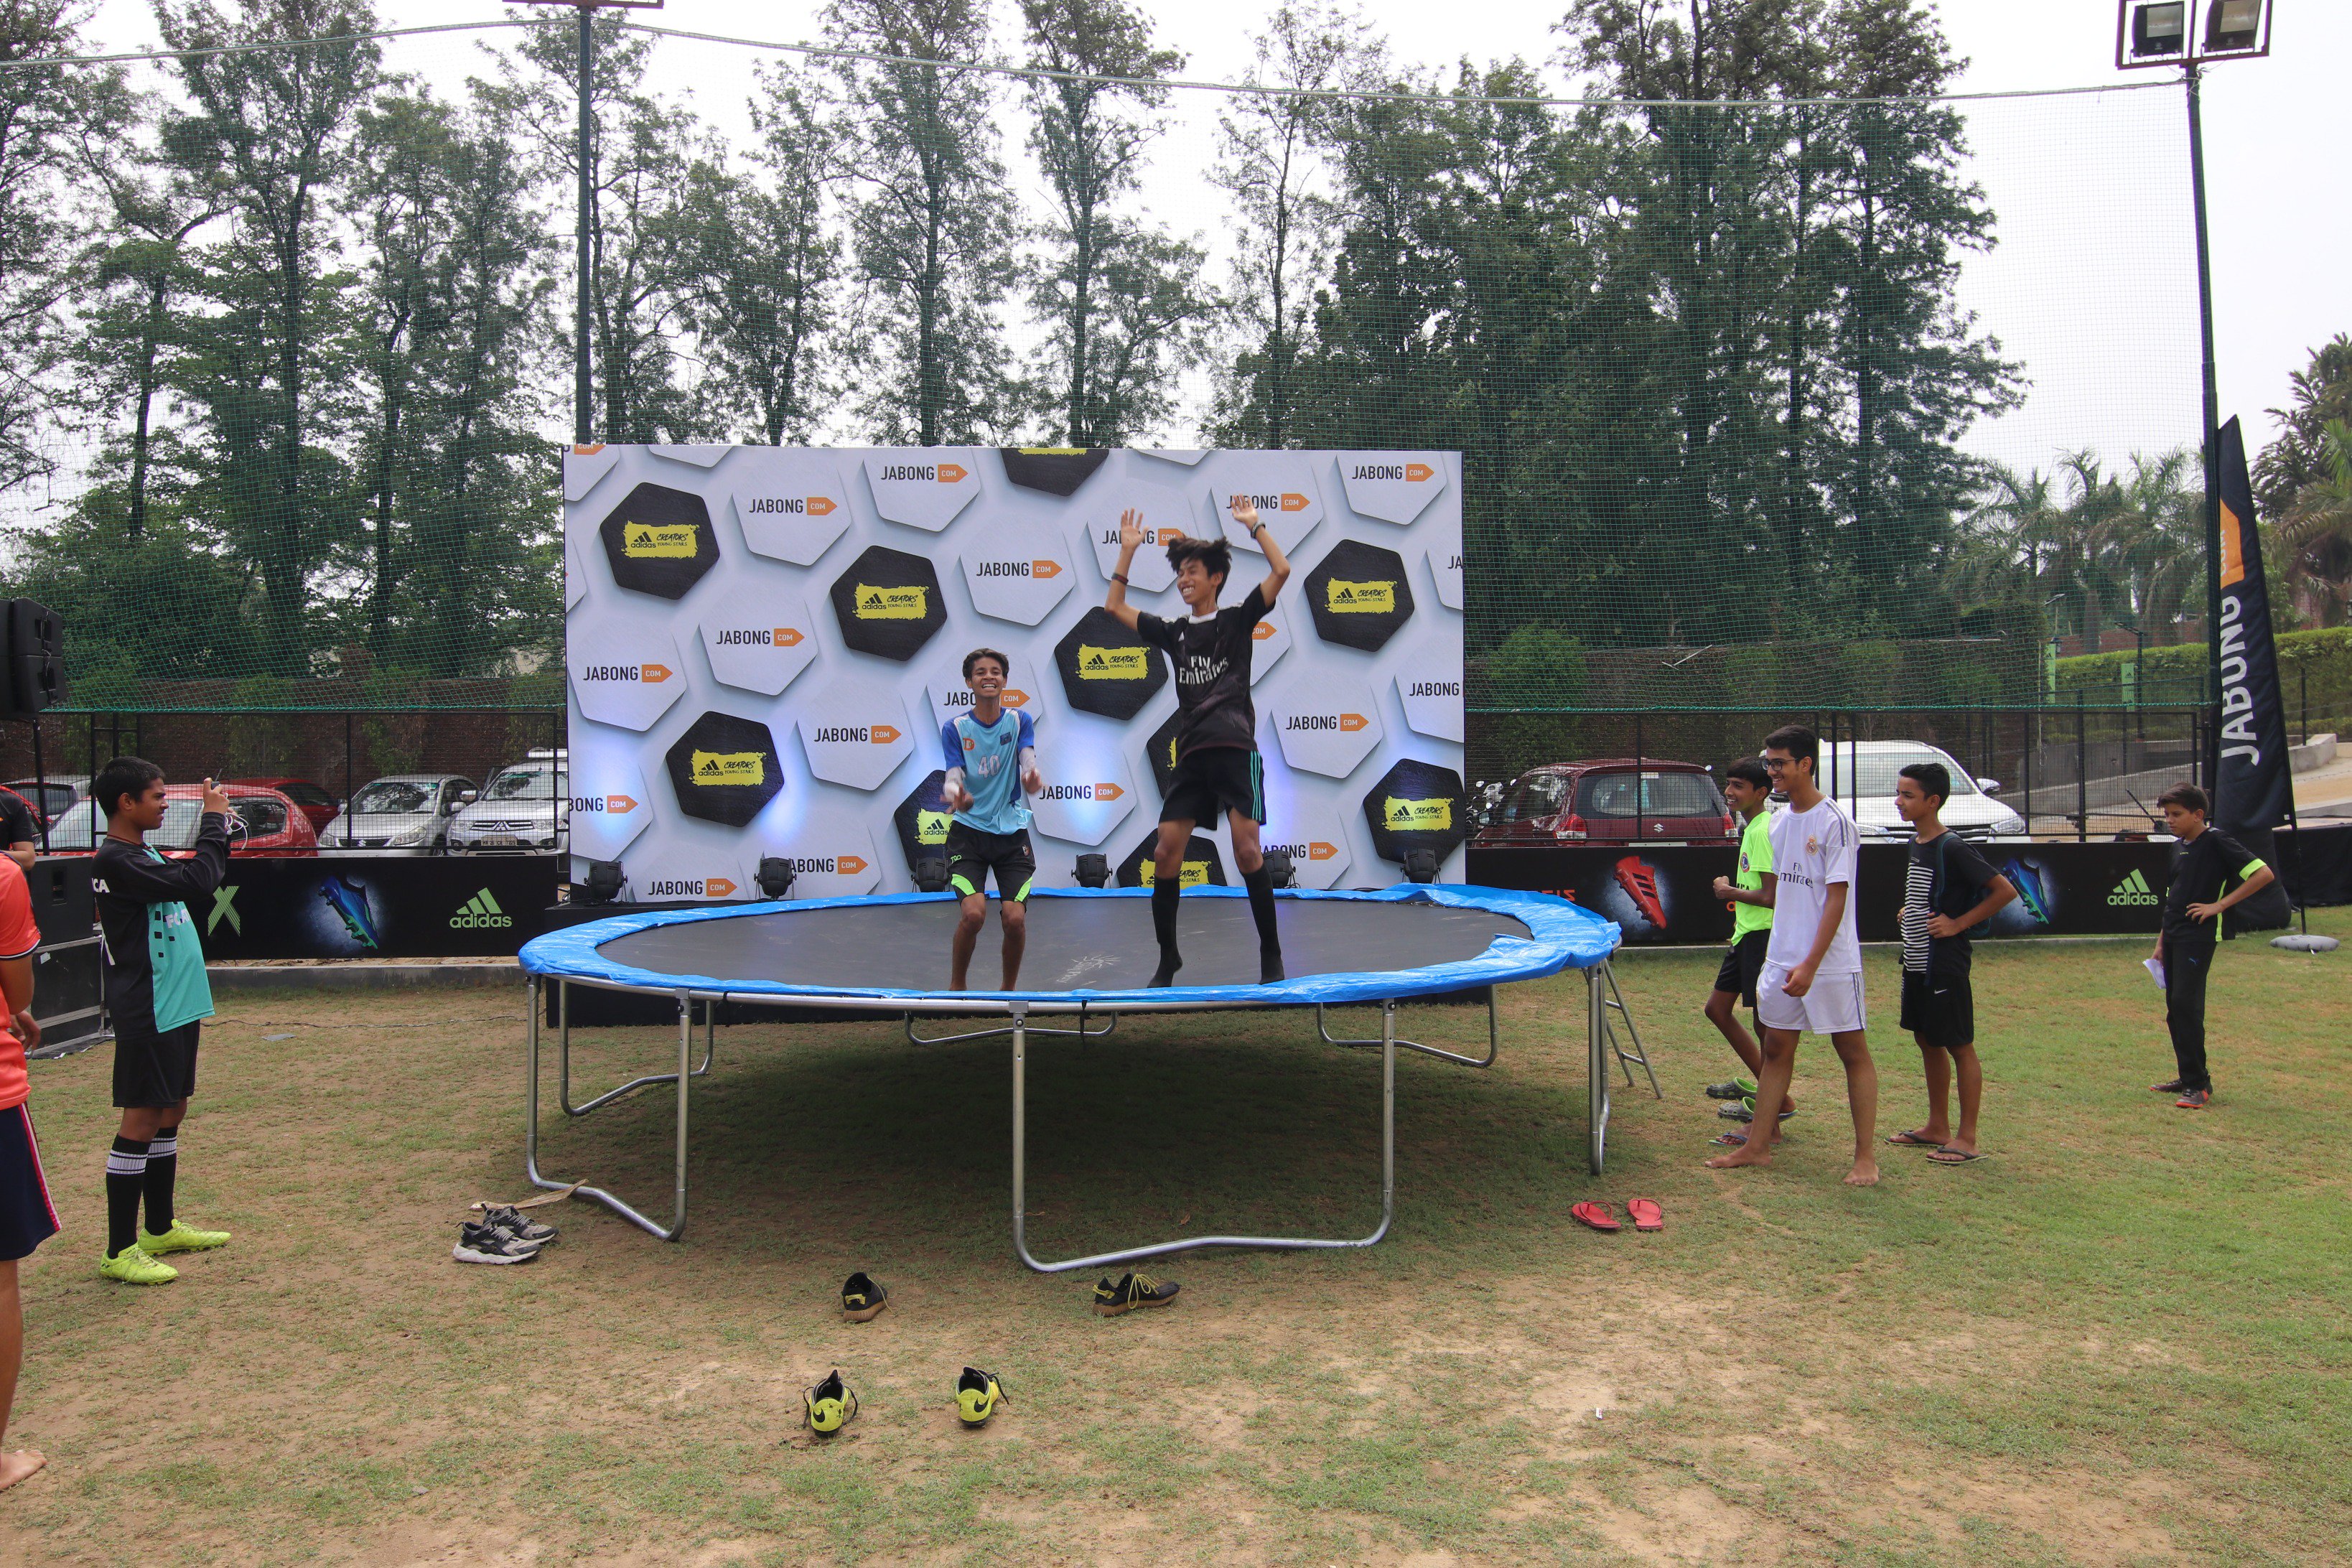 Jabong.com on Twitter: "It was a day filled with the spirit to win ! ADIDAS with JABONG took an initiative to treat Young Football Stars with super fun engagement activities at